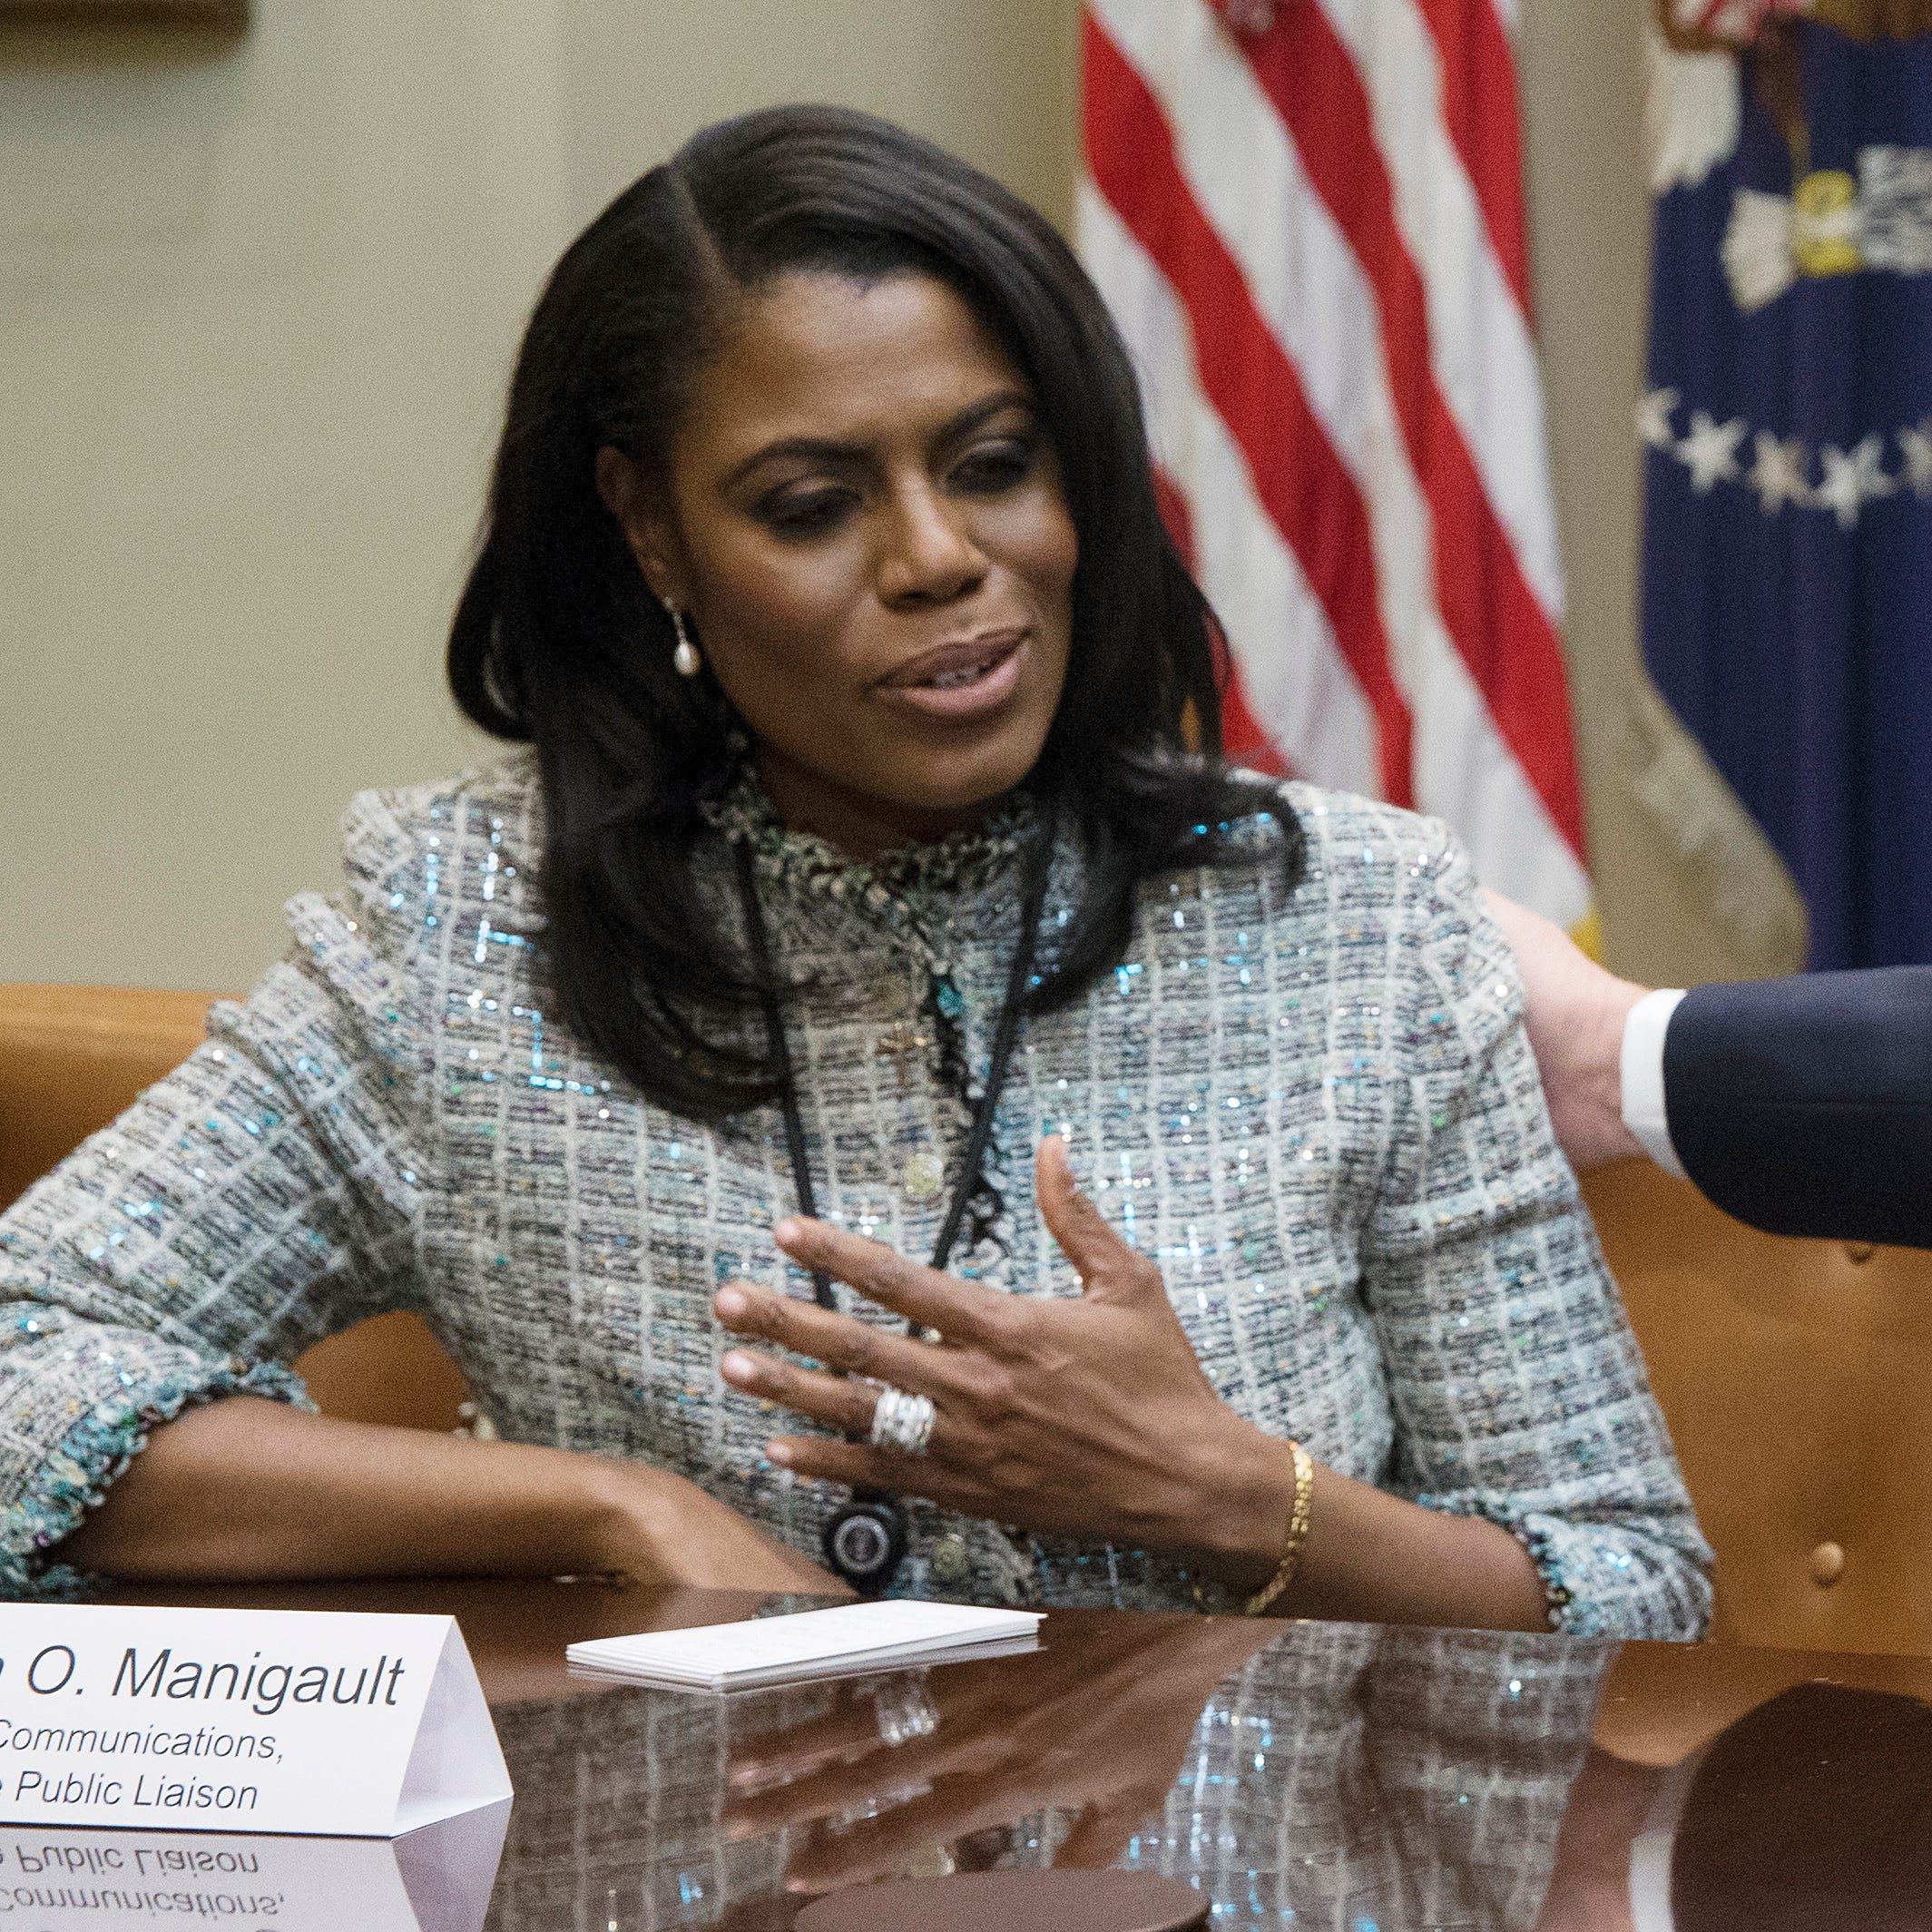 President Donald Trump speaks beside then Director of Communications for the Office of Public Liaison Omarosa Manigault-Newman.